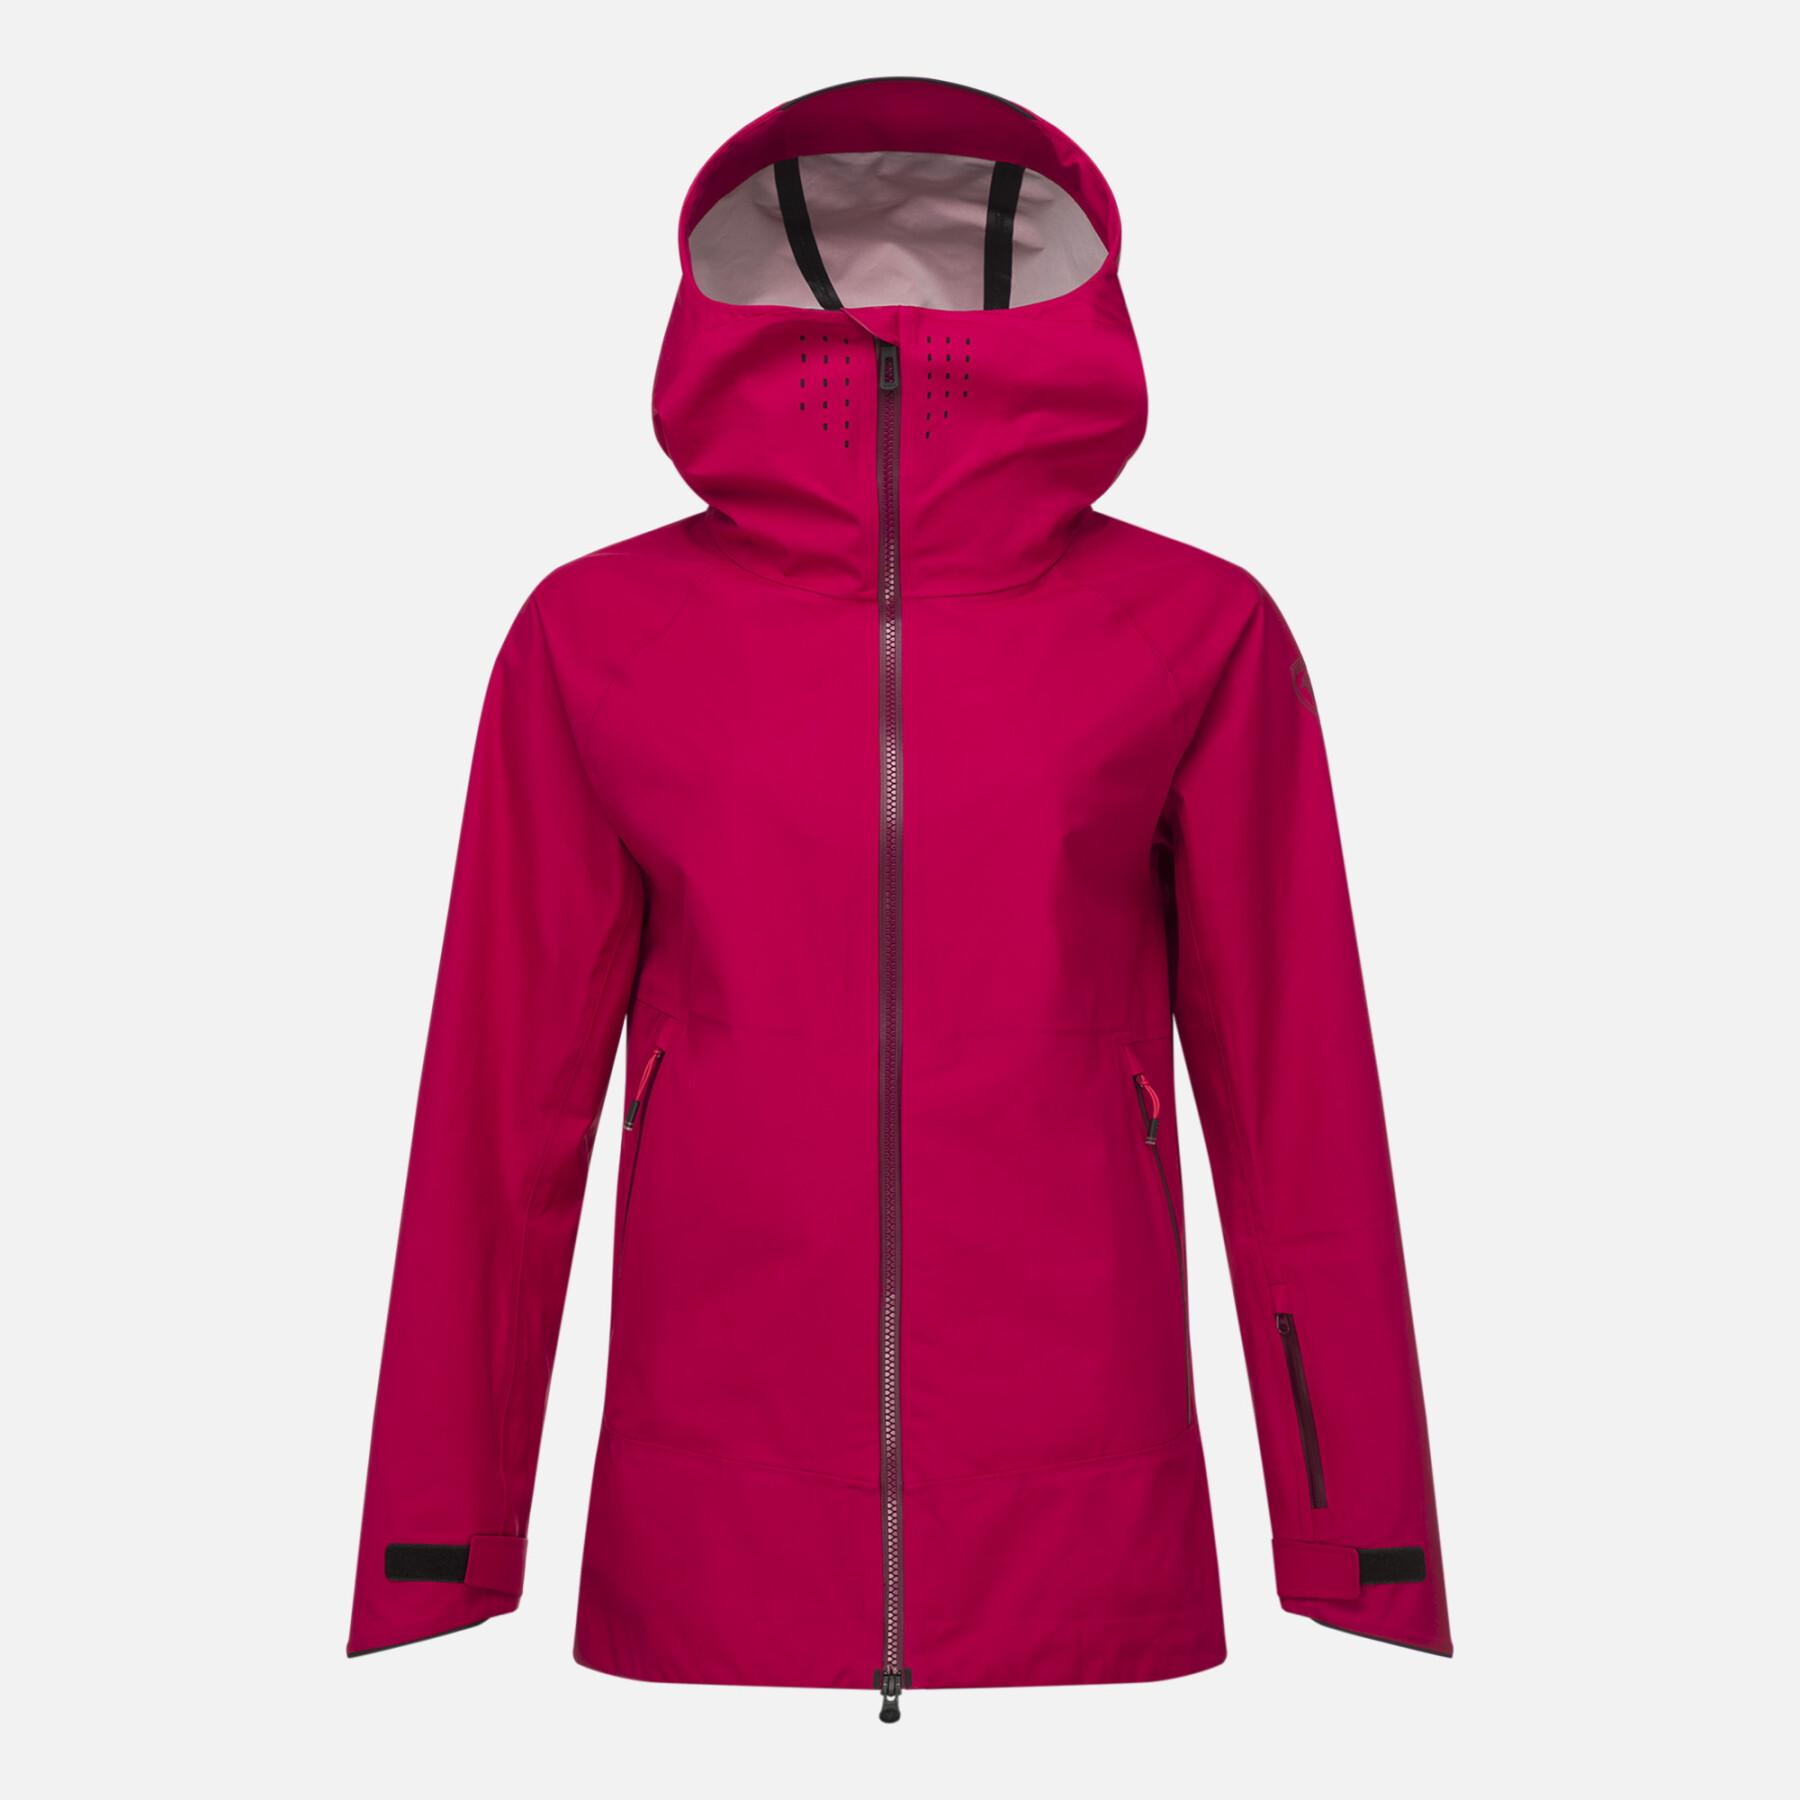 Chaqueta impermeable para mujer Rossignol SKPR 3L